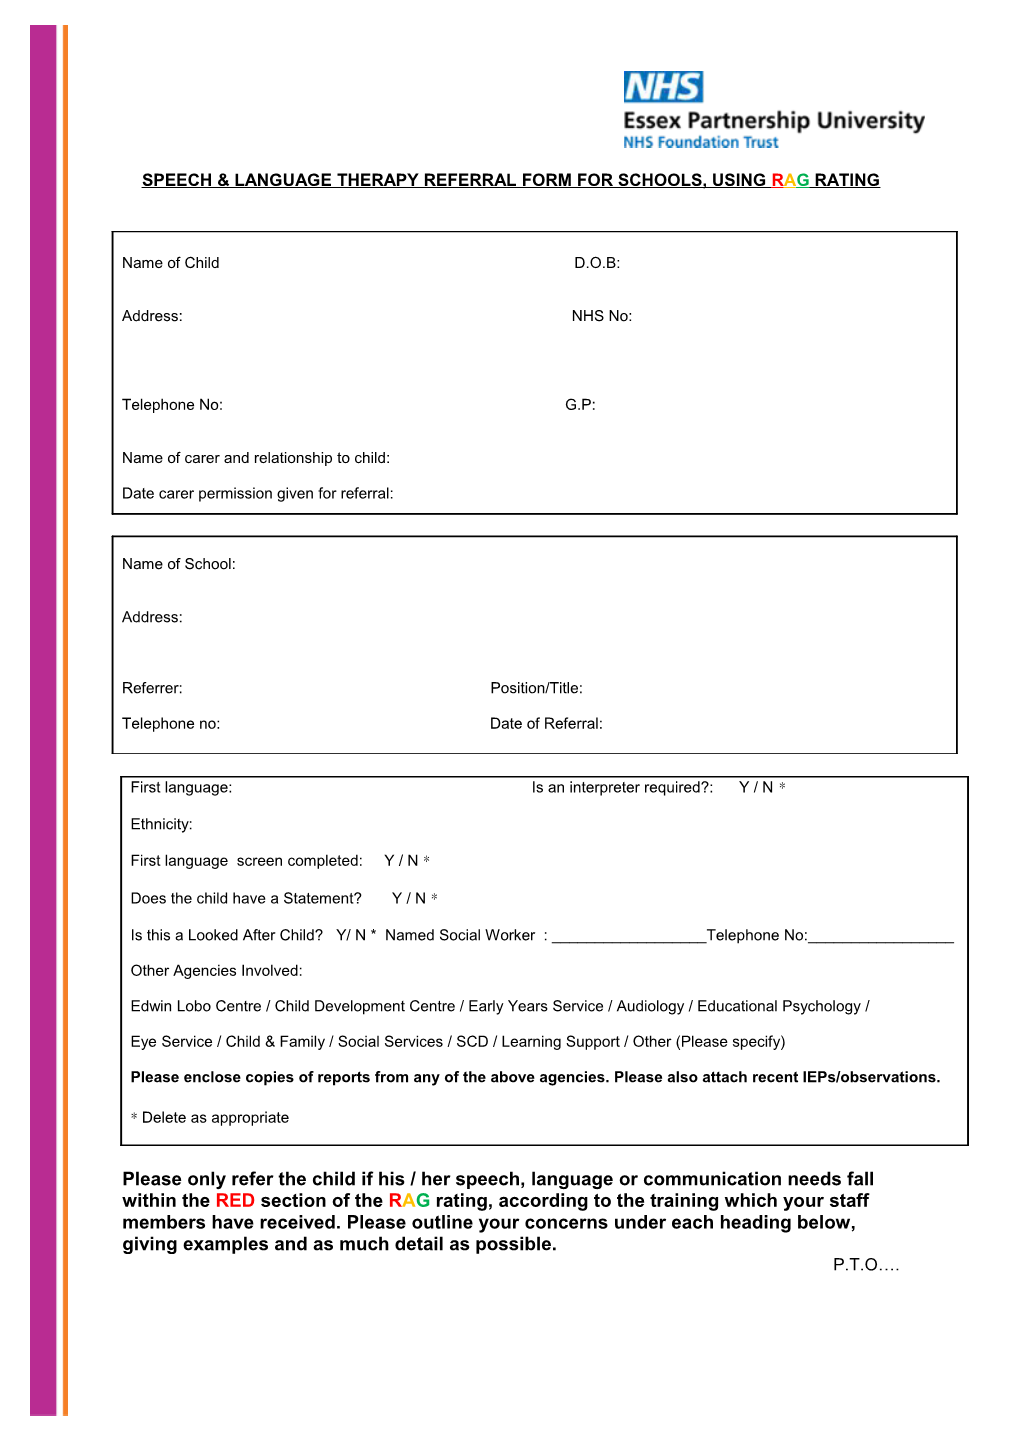 Schools Referral Form to Speech & Language Therapy